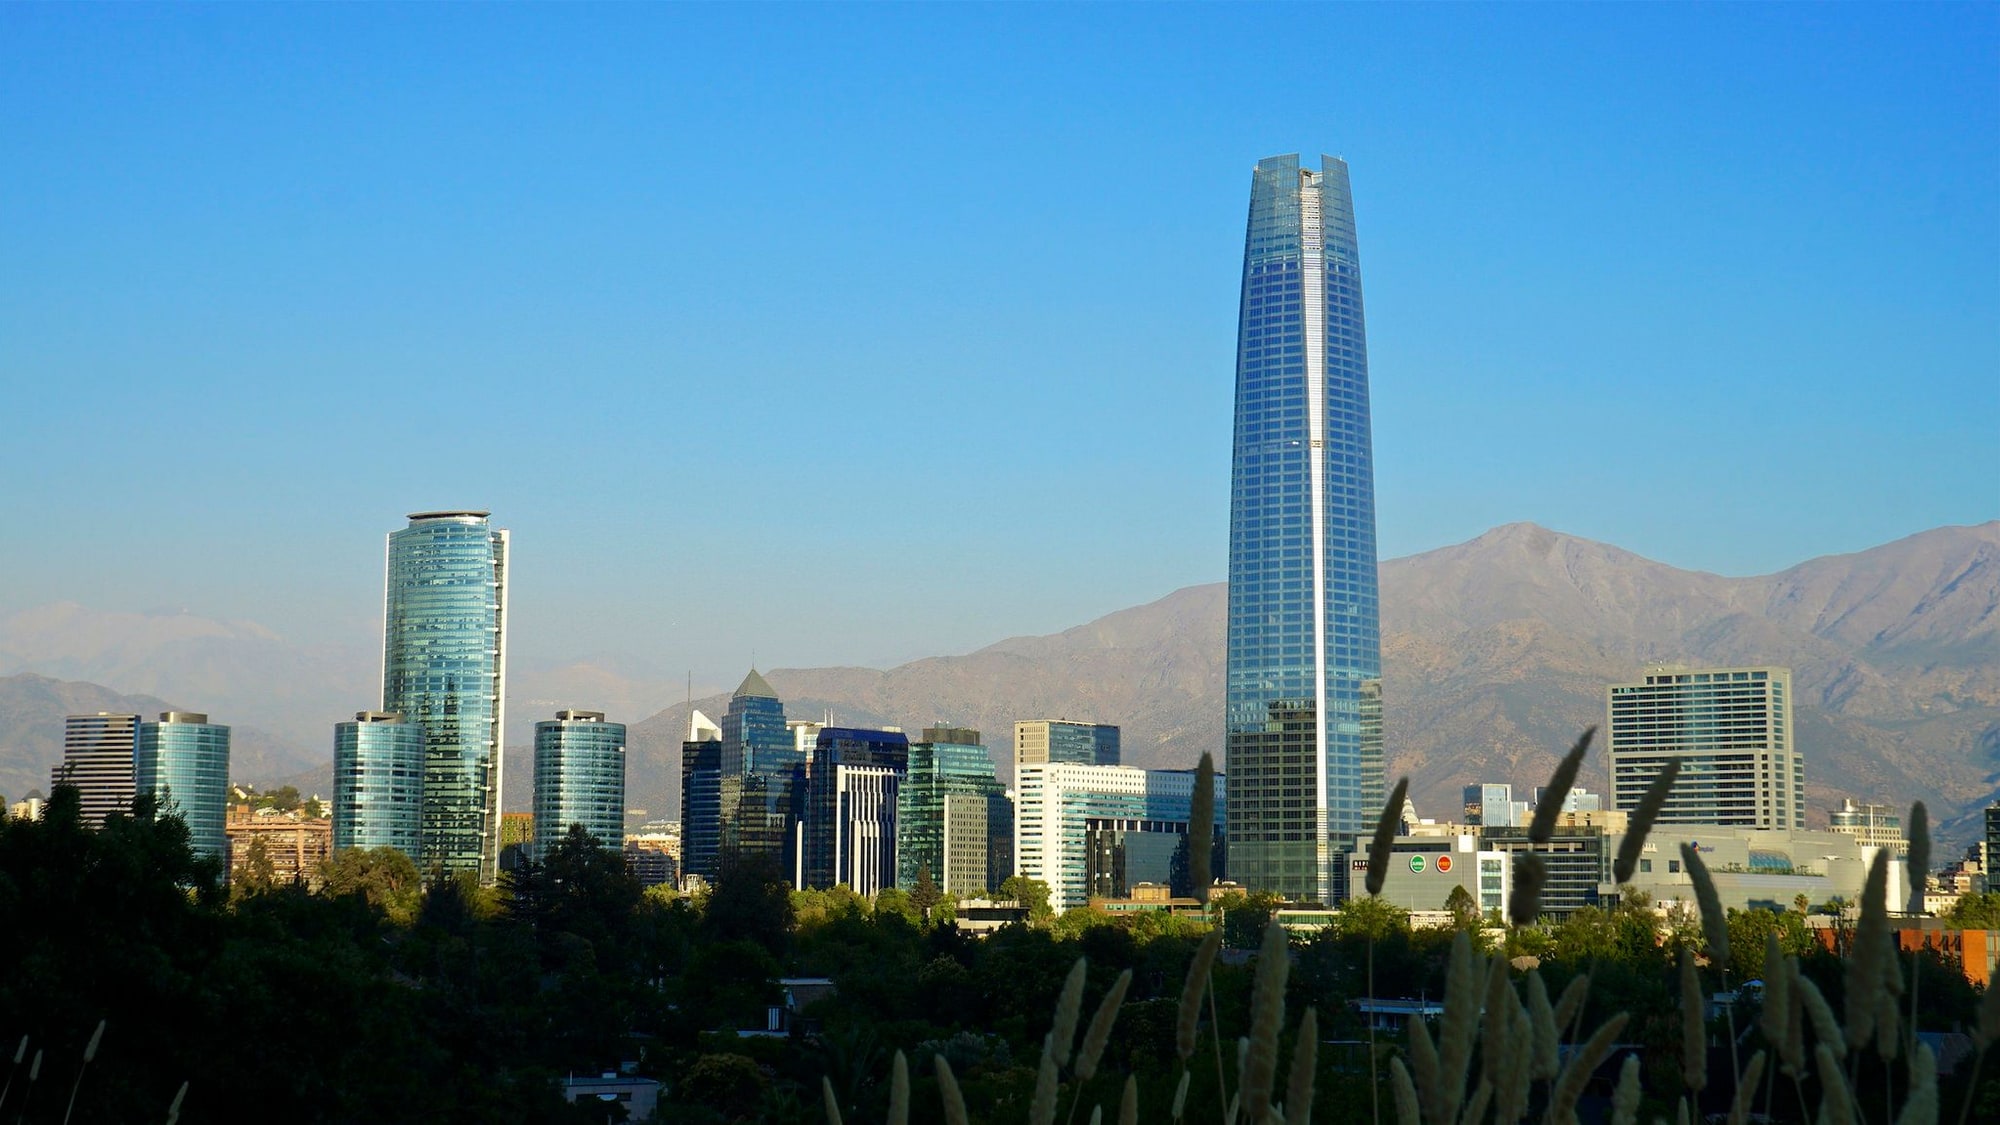 Santiago, Chile, by Flickr user alobos Life (Used under CC License)